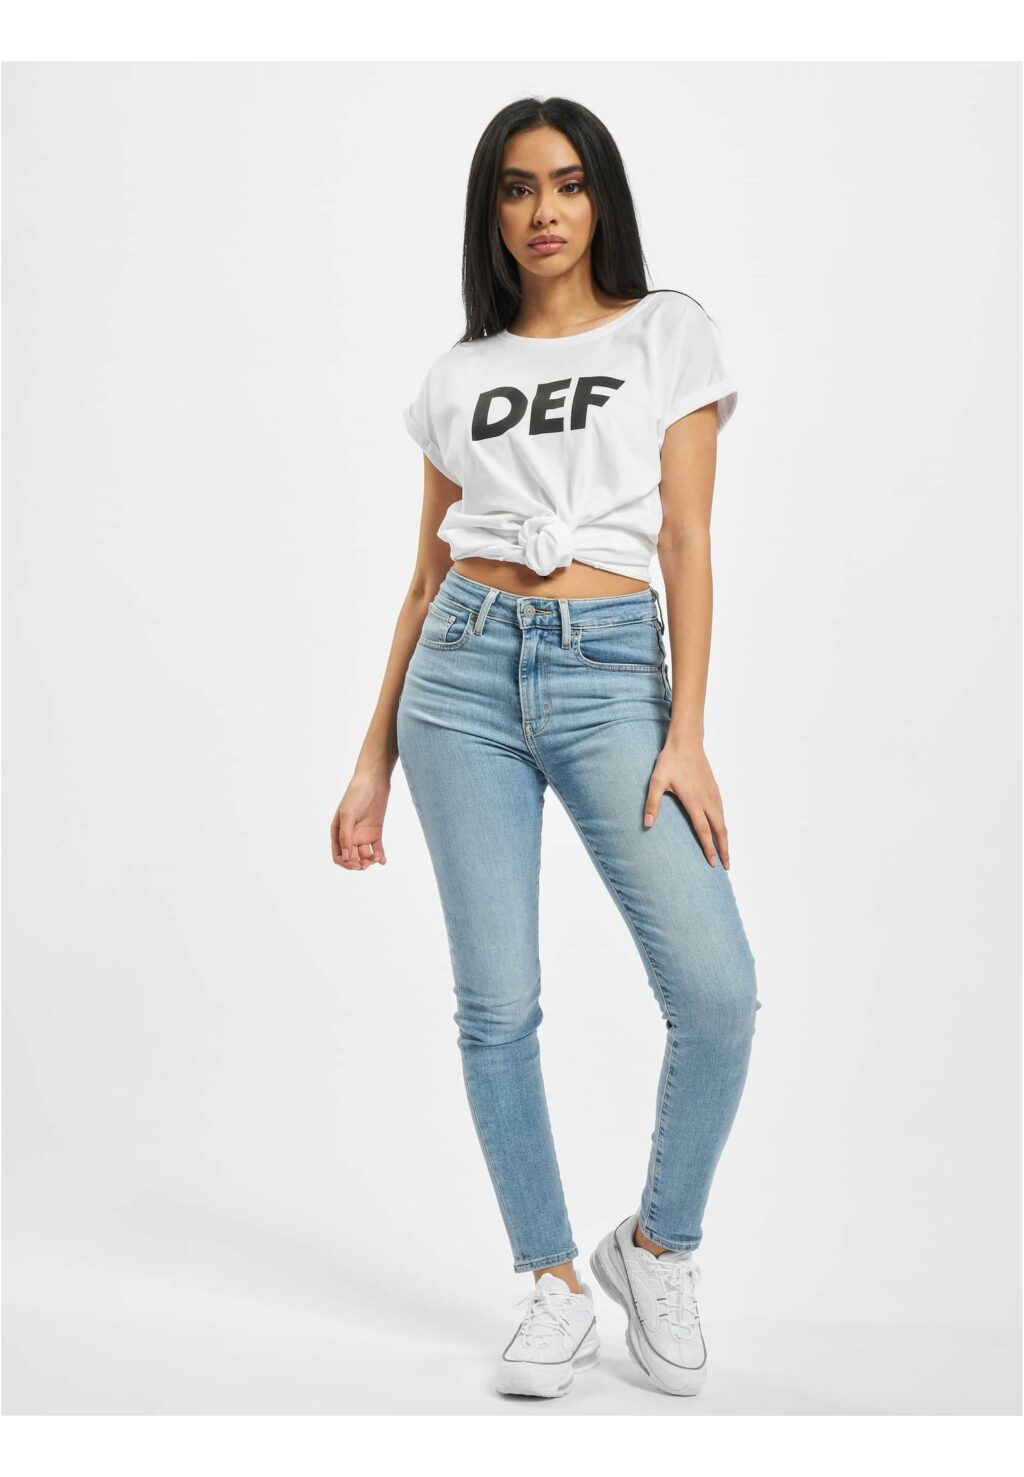 DEF Sizza T-Shirt white DFTS056T